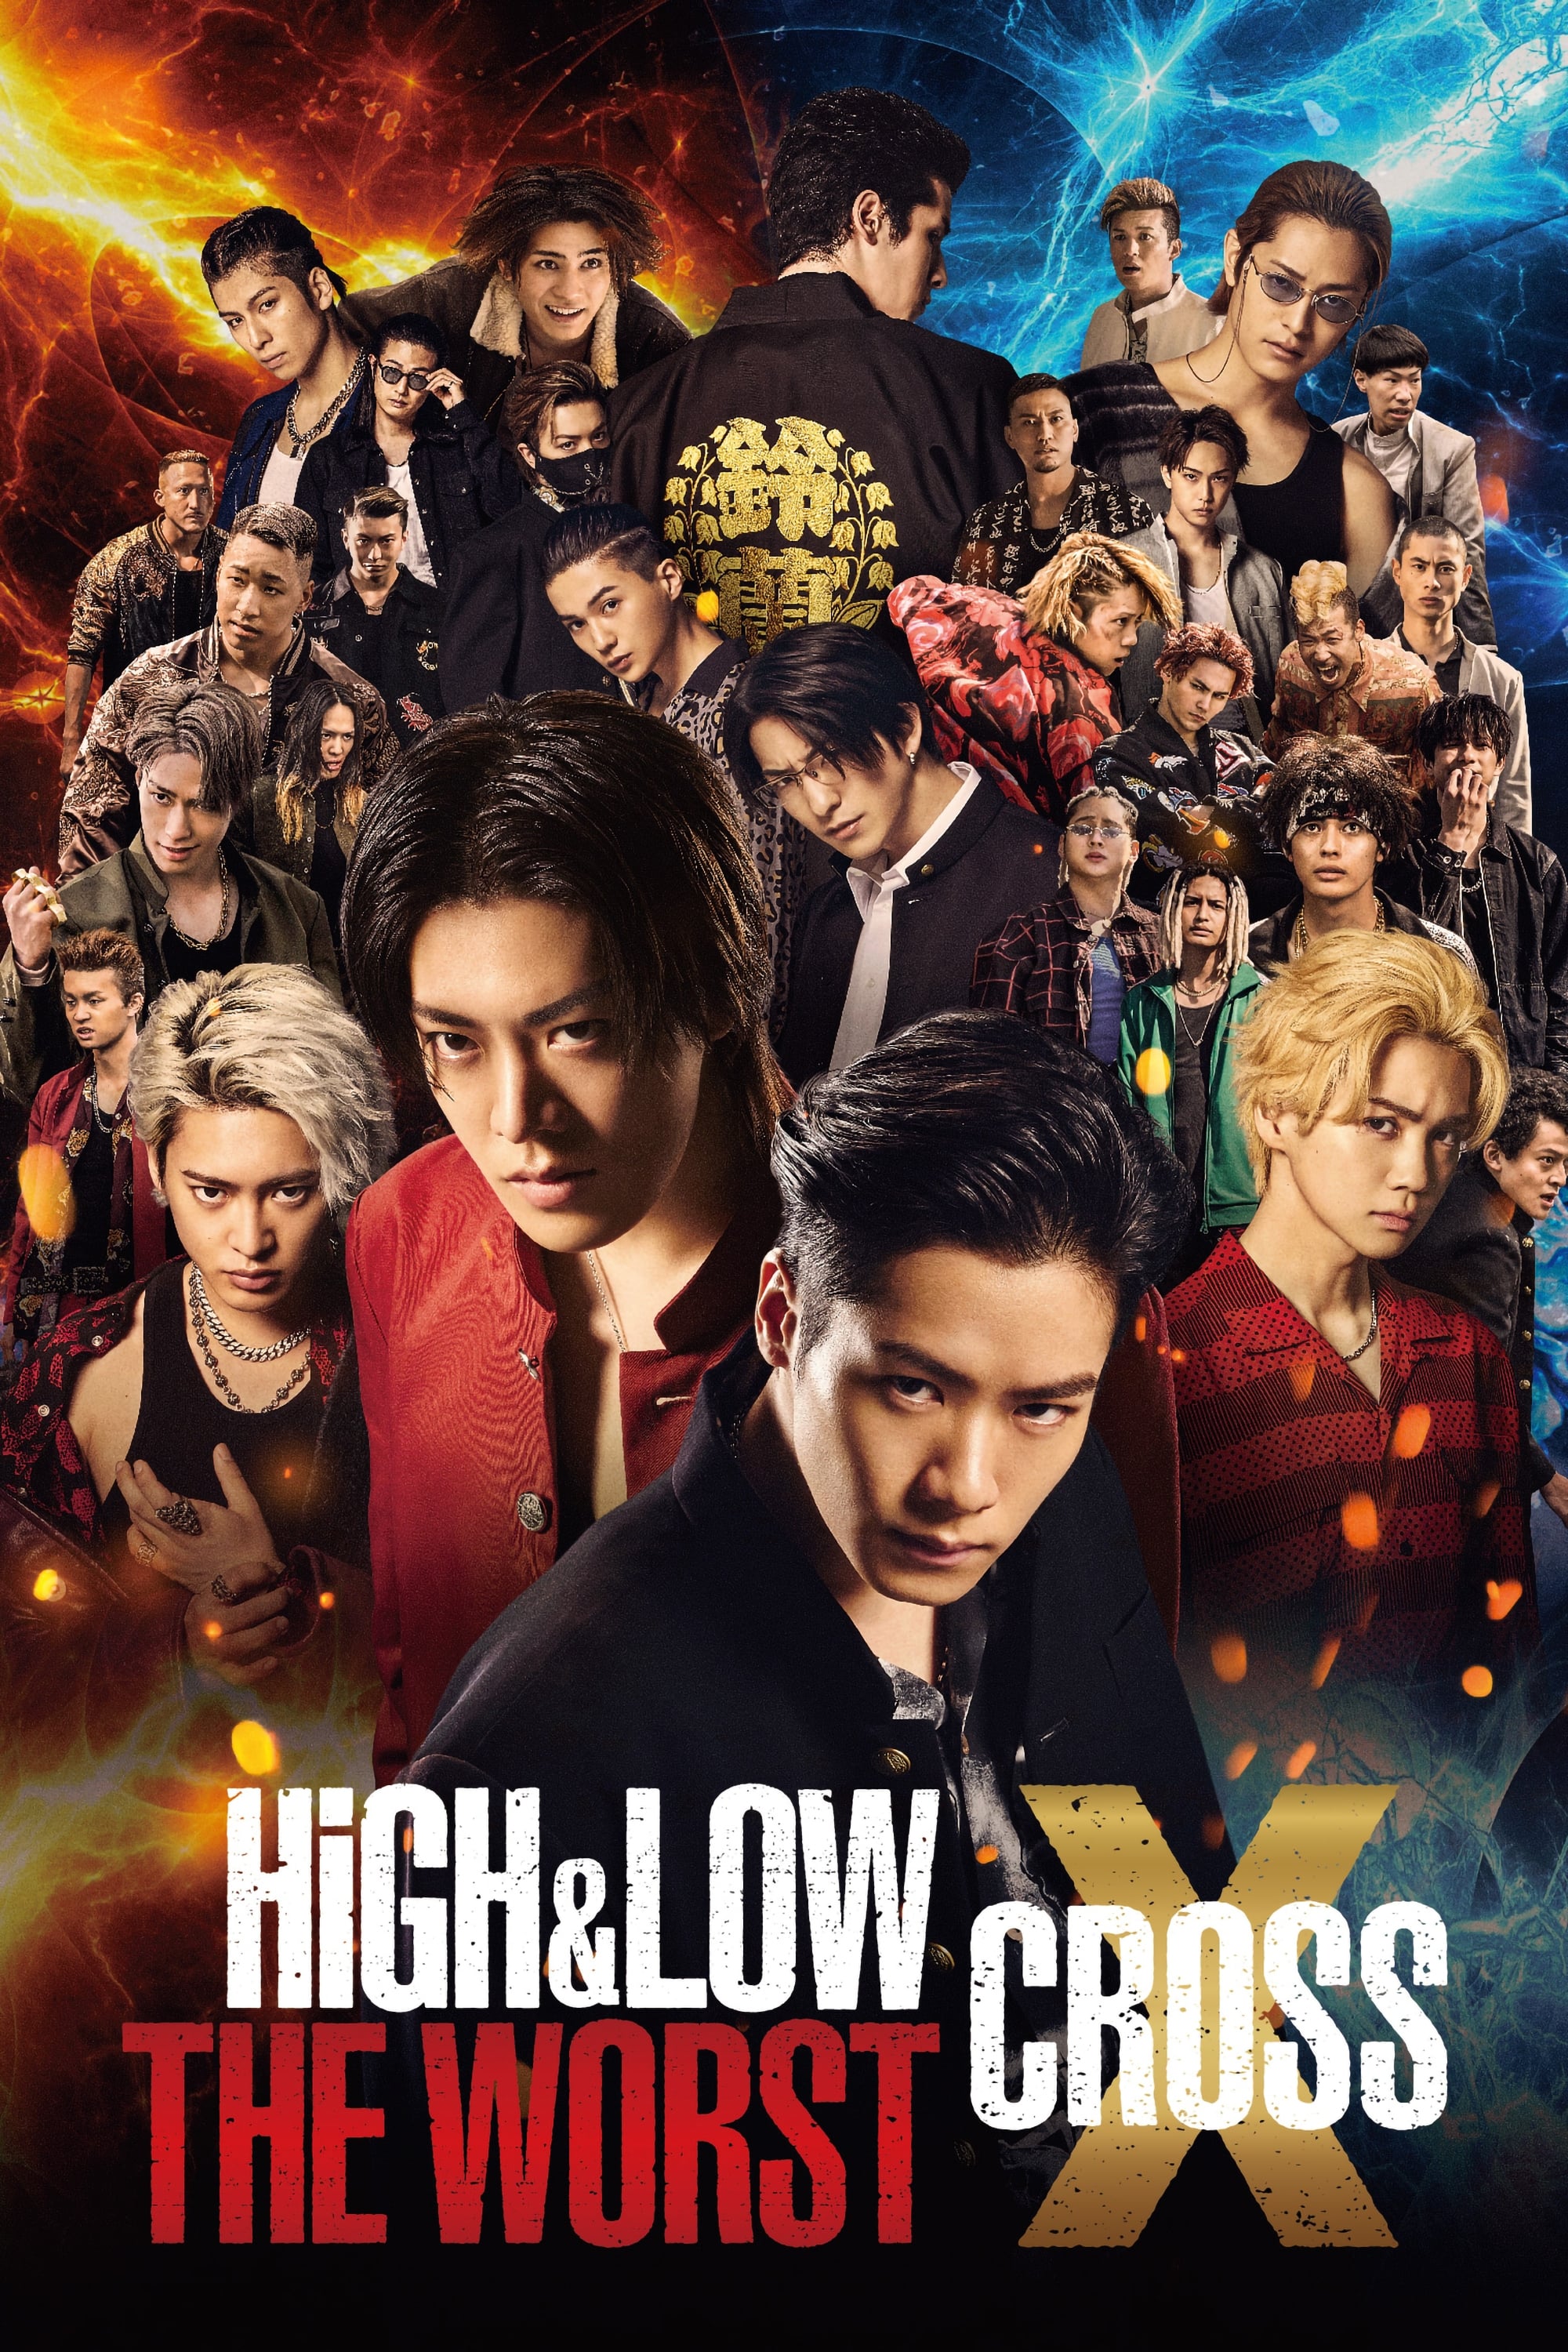 Trailer Du Film High And Low The Worst X High And Low The Worst X Bande Annonce Vo Cinésérie 1609